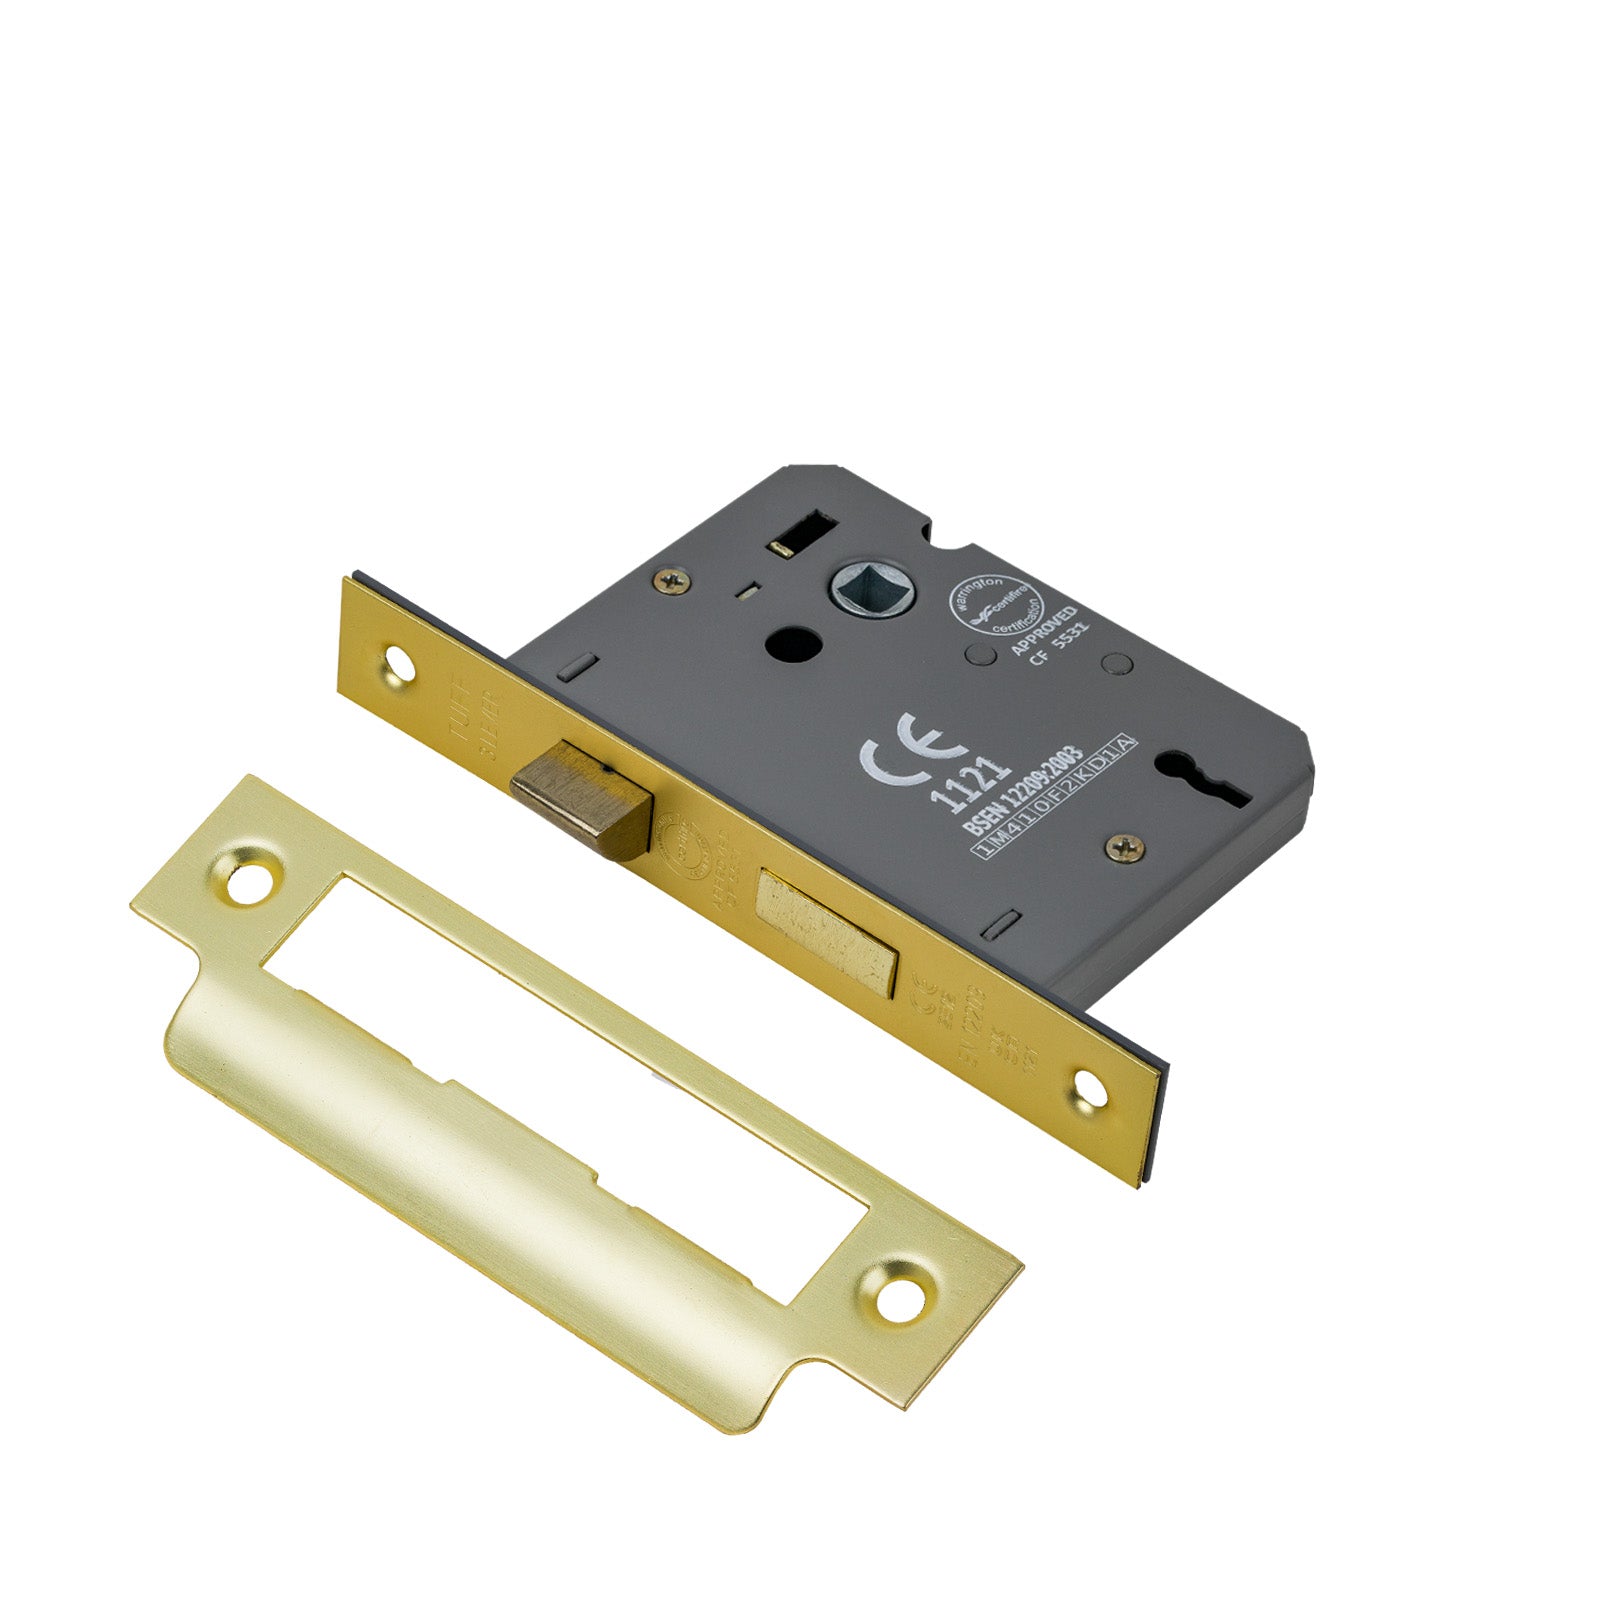 SHOW 3 Lever Sash Lock - 3 Inch with Satin Brass finished forend and striker plate